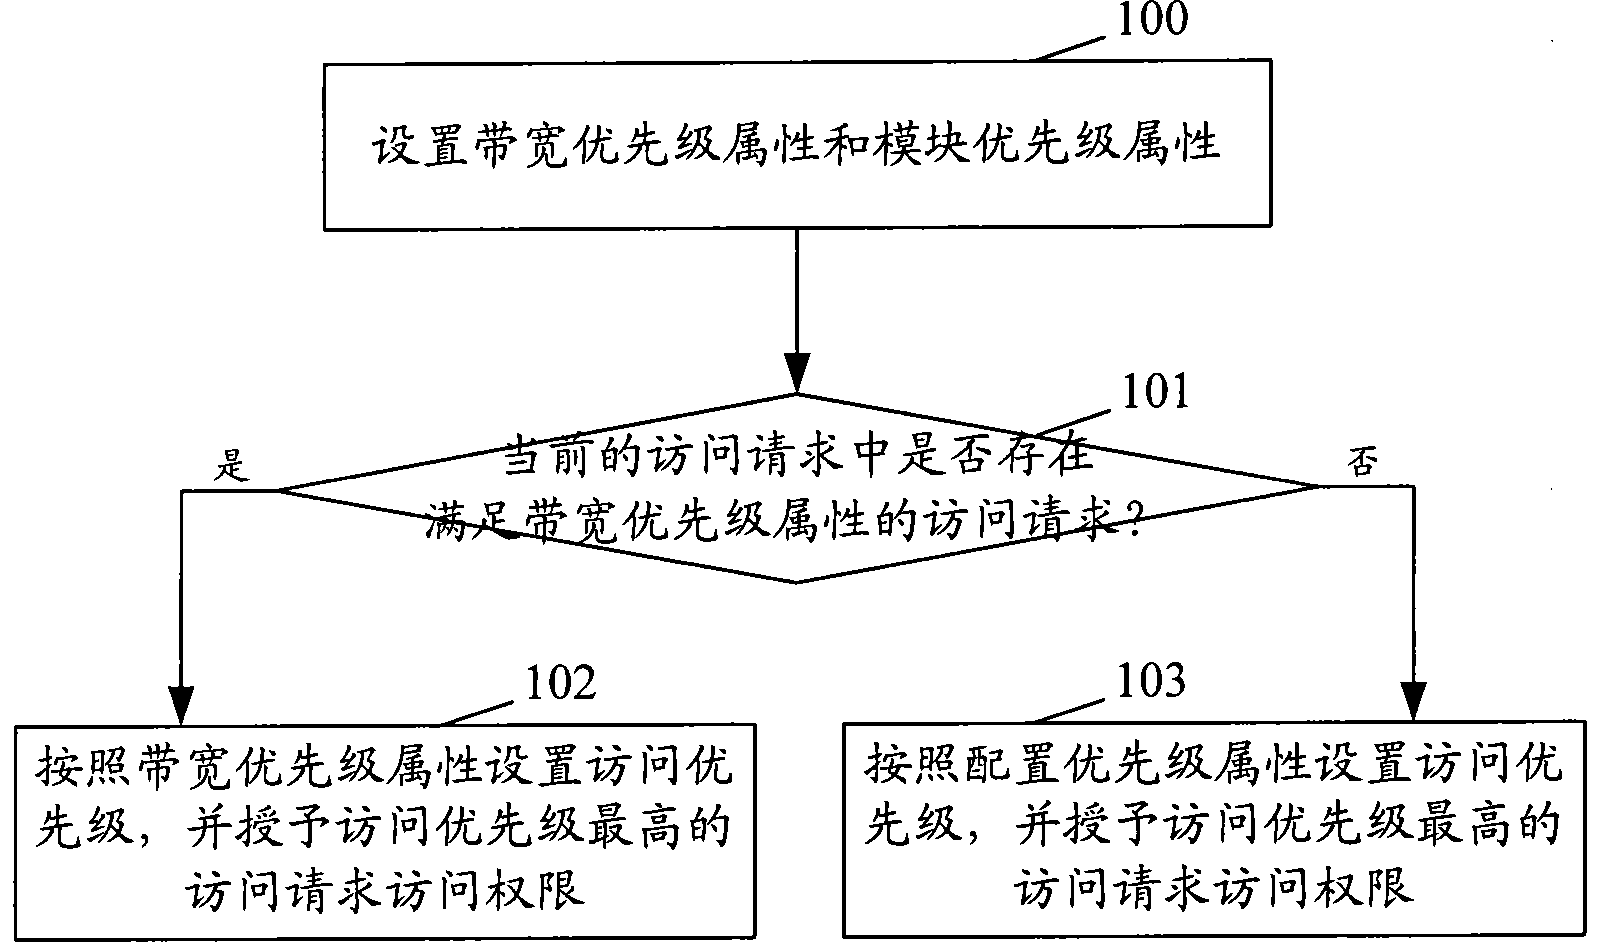 Method for access to external memory